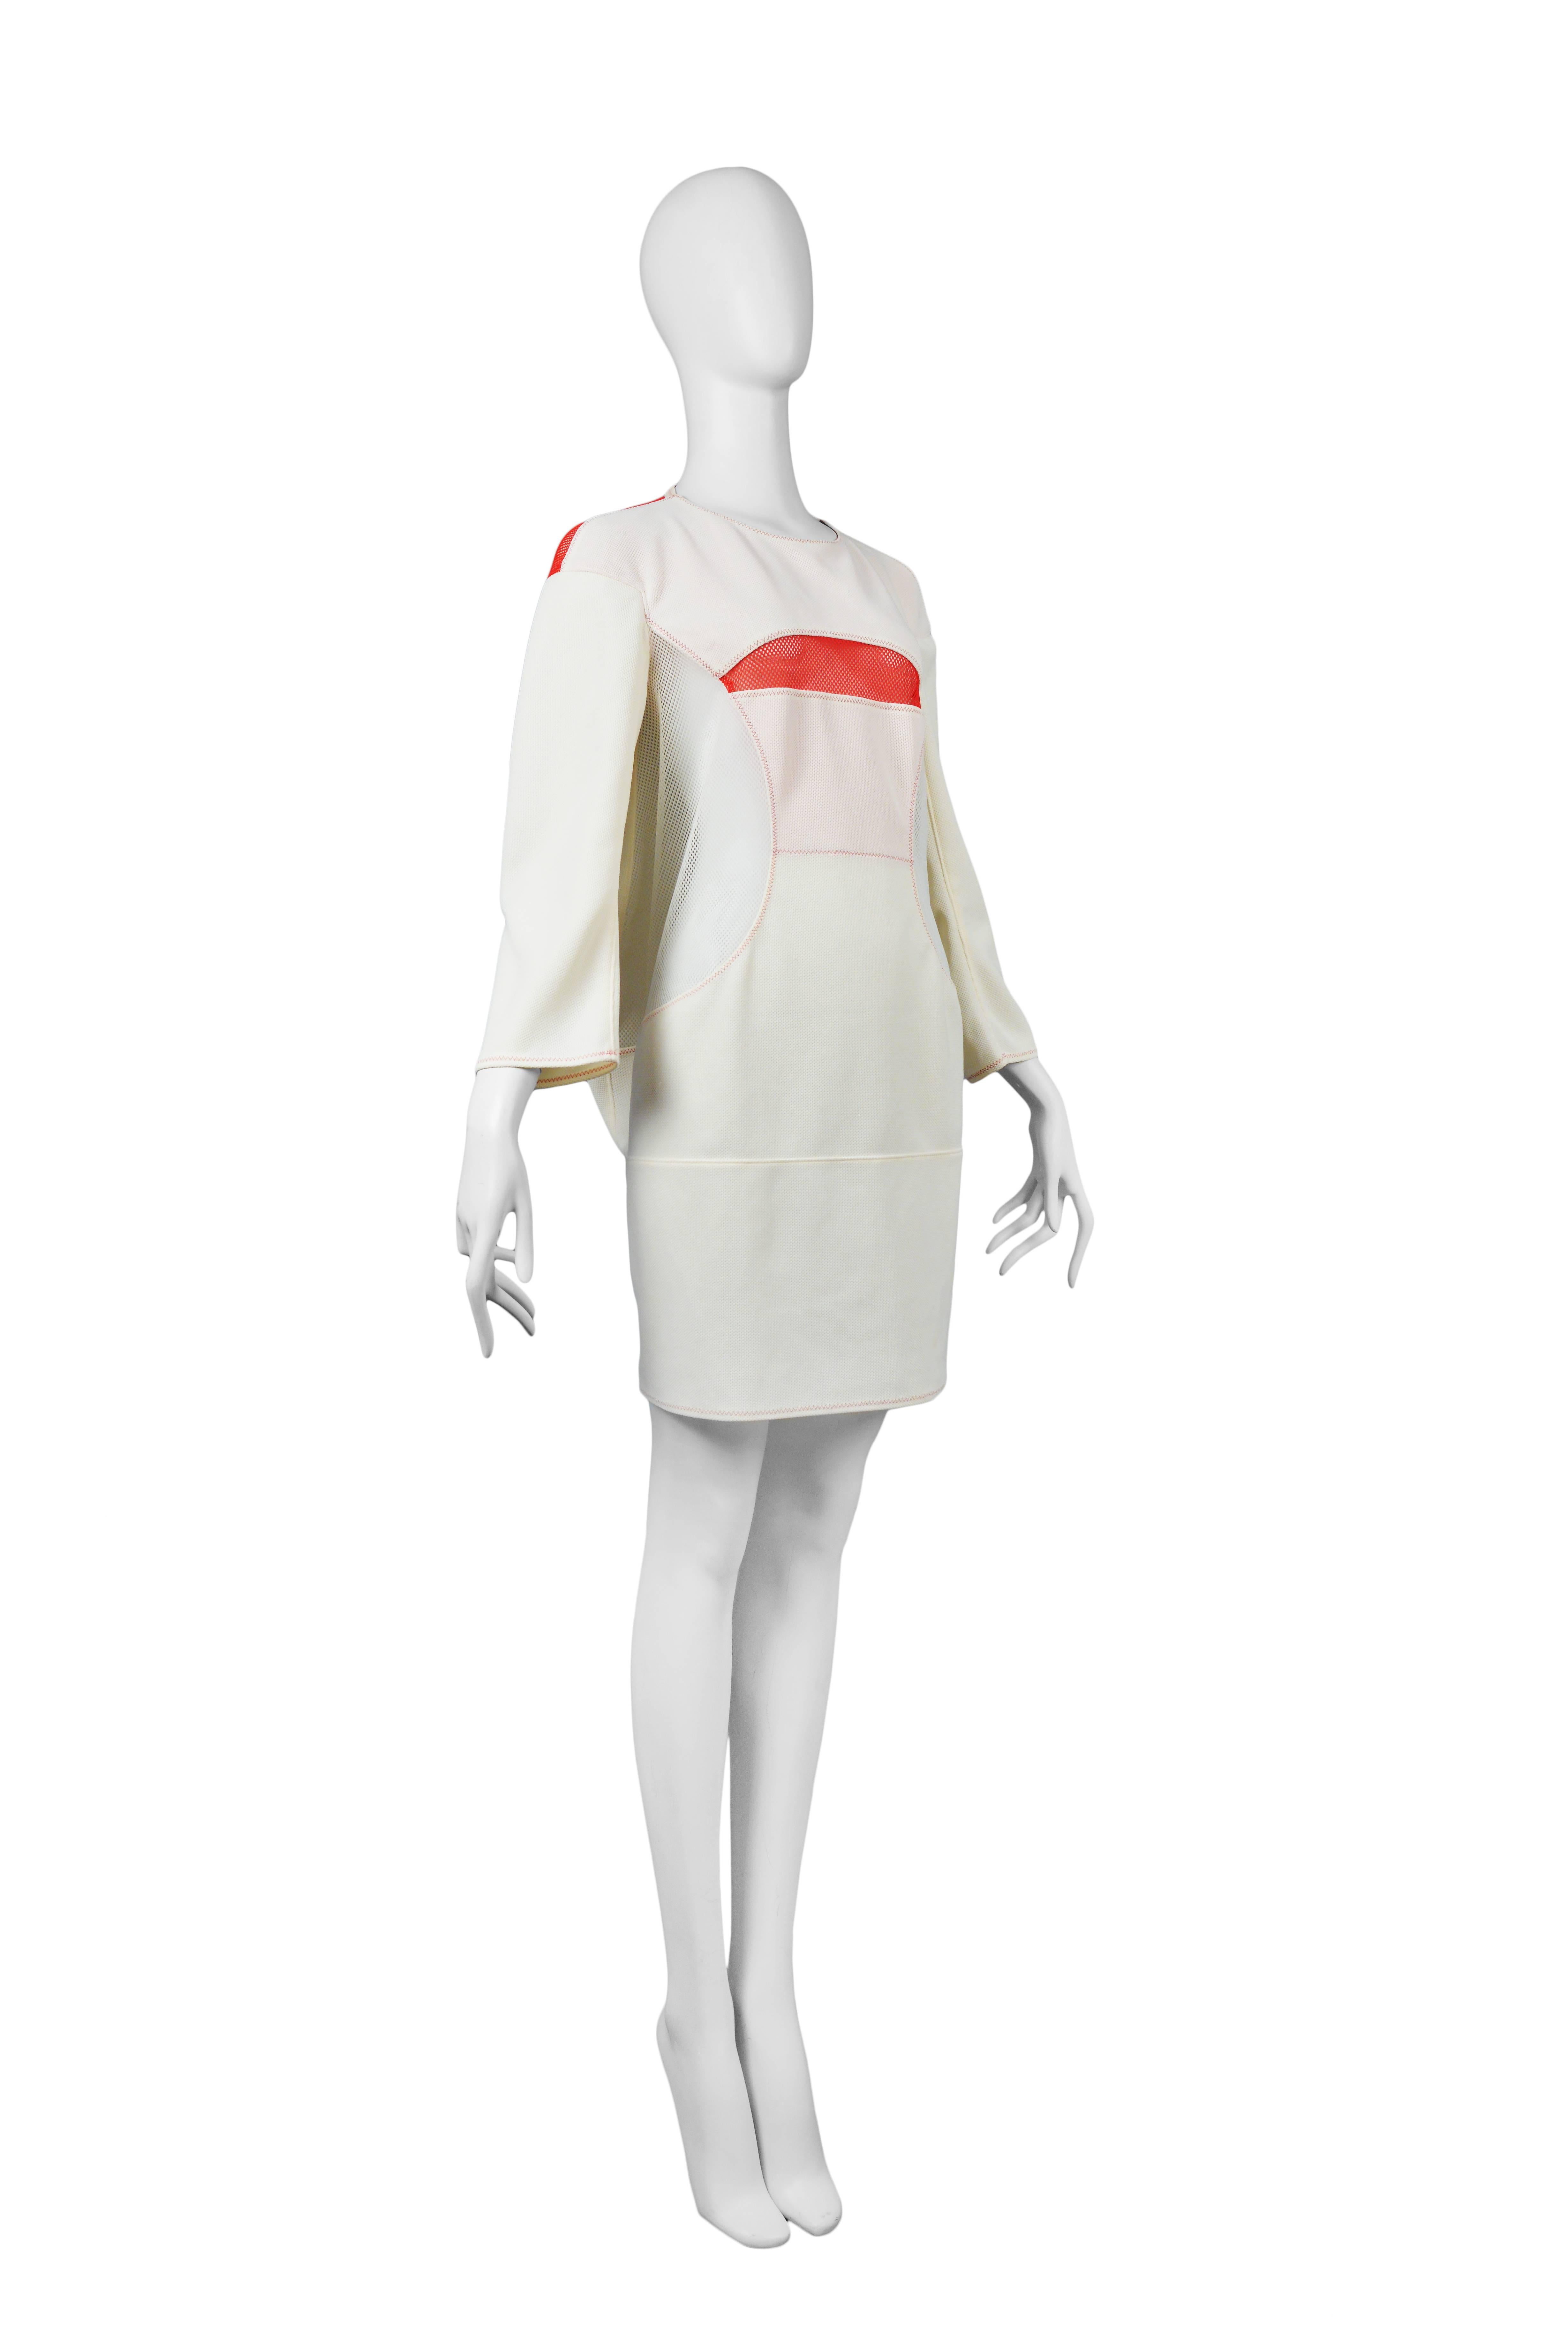 Vintage Junya Watanabe white tech dress featuring red mesh panels and long sleeves. Circa Spring / Summer 2013.
Please inquire for additional images.